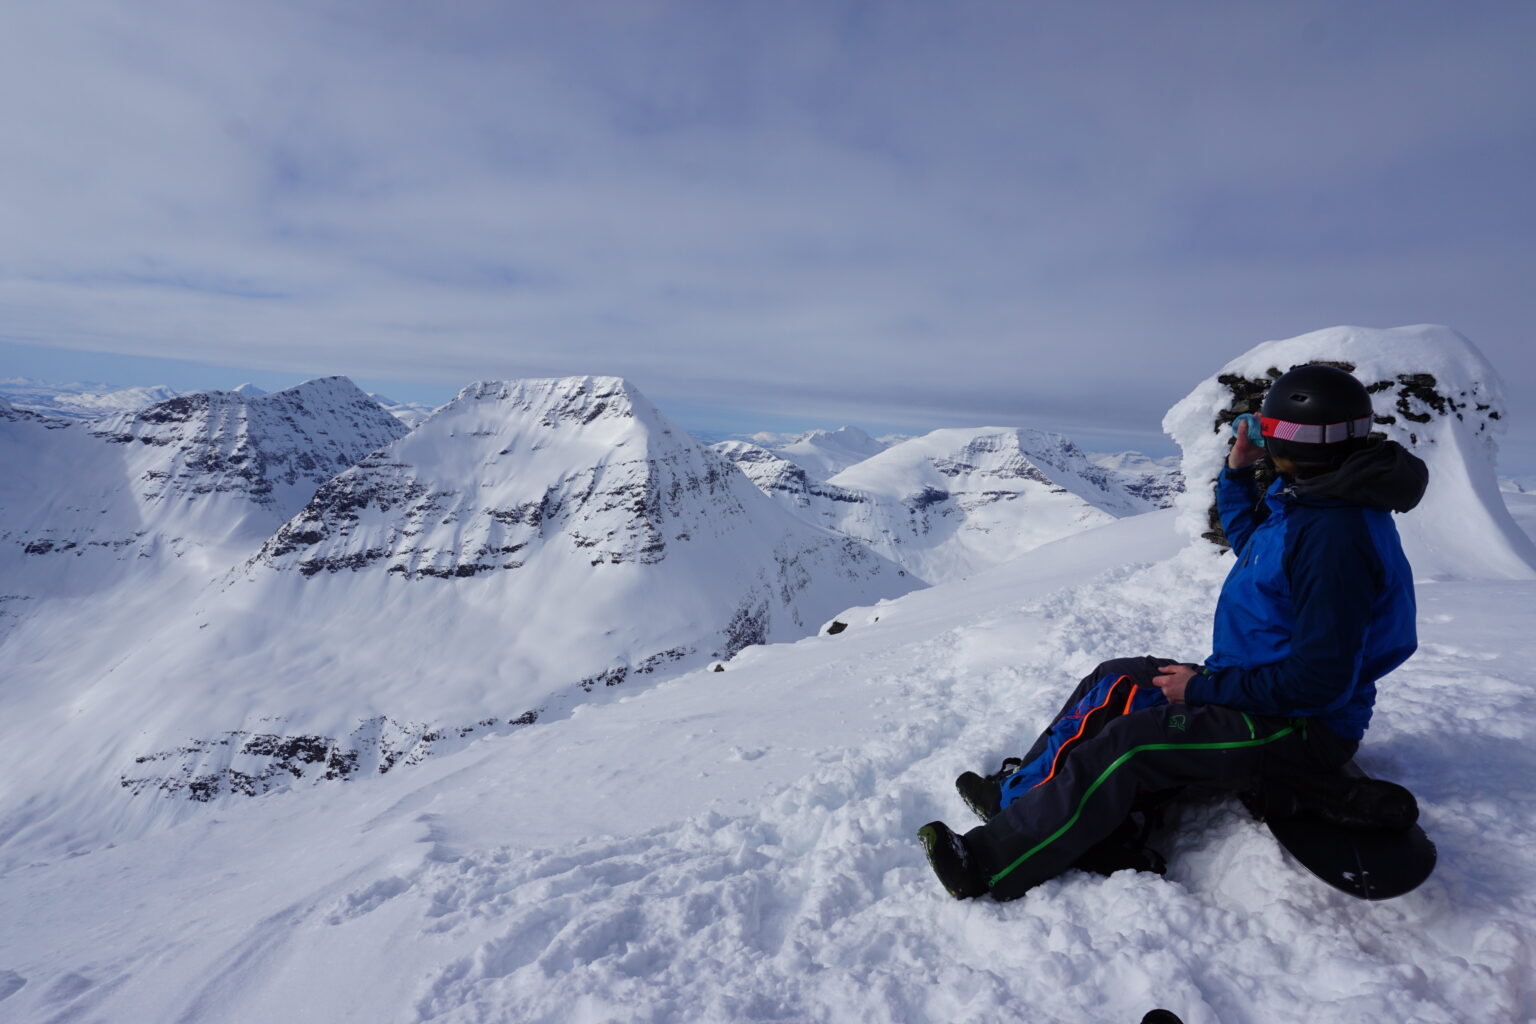 Enjoying the view from the summit before snowboarding Blåbærfjellet South face